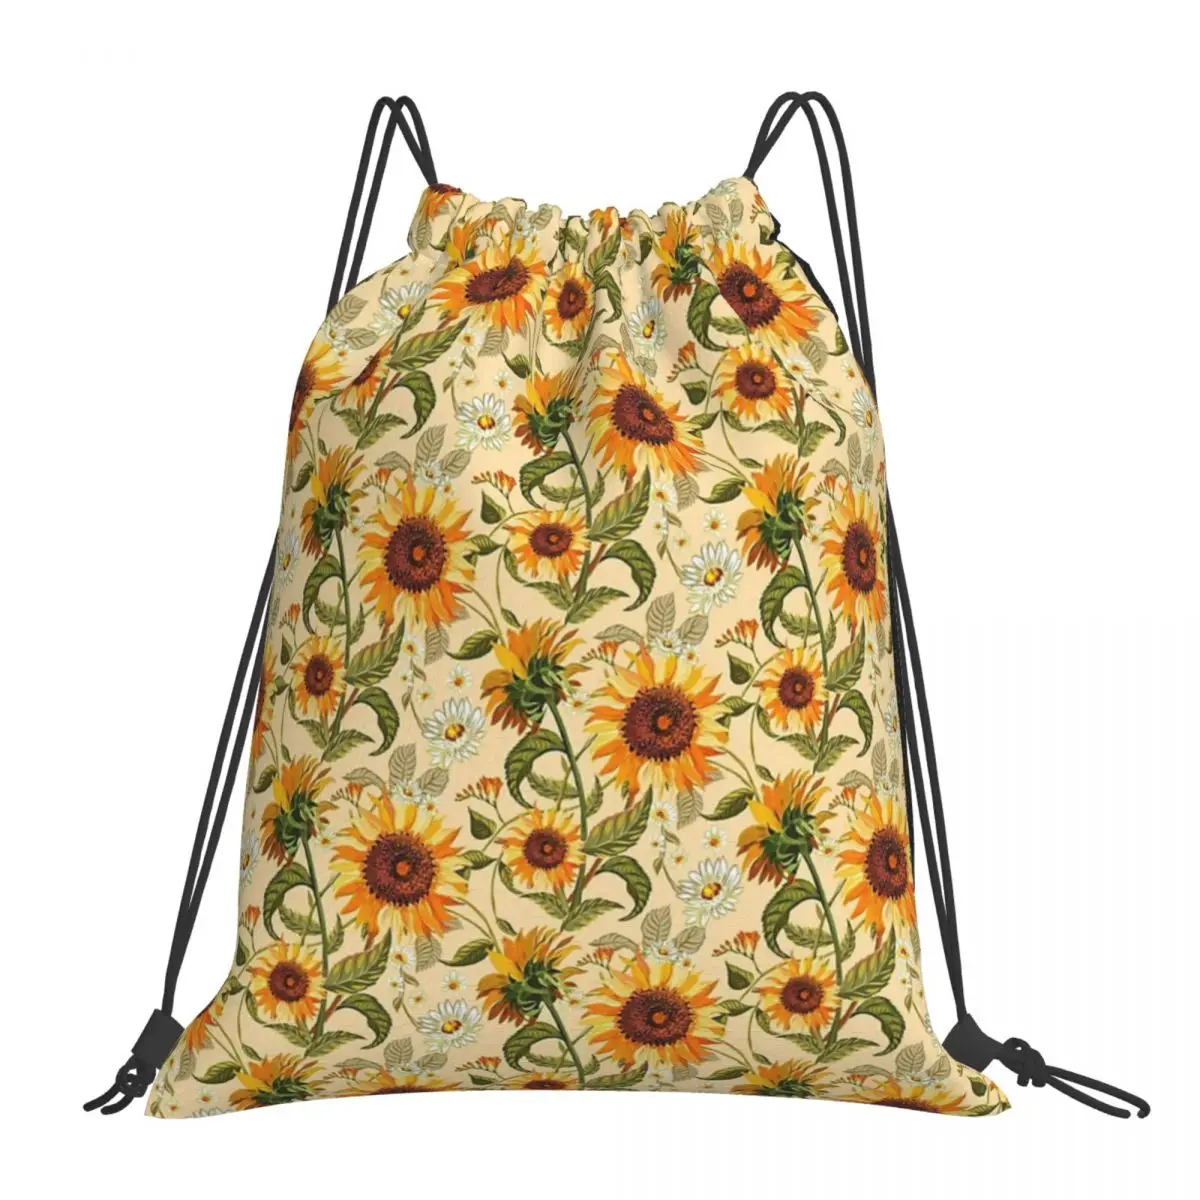 

Sunflowers 70s Vintage Golden Retro Pattern, Flowers Backpack Casual Portable Drawstring Bags Sports Bag Book Bags For Man Woman